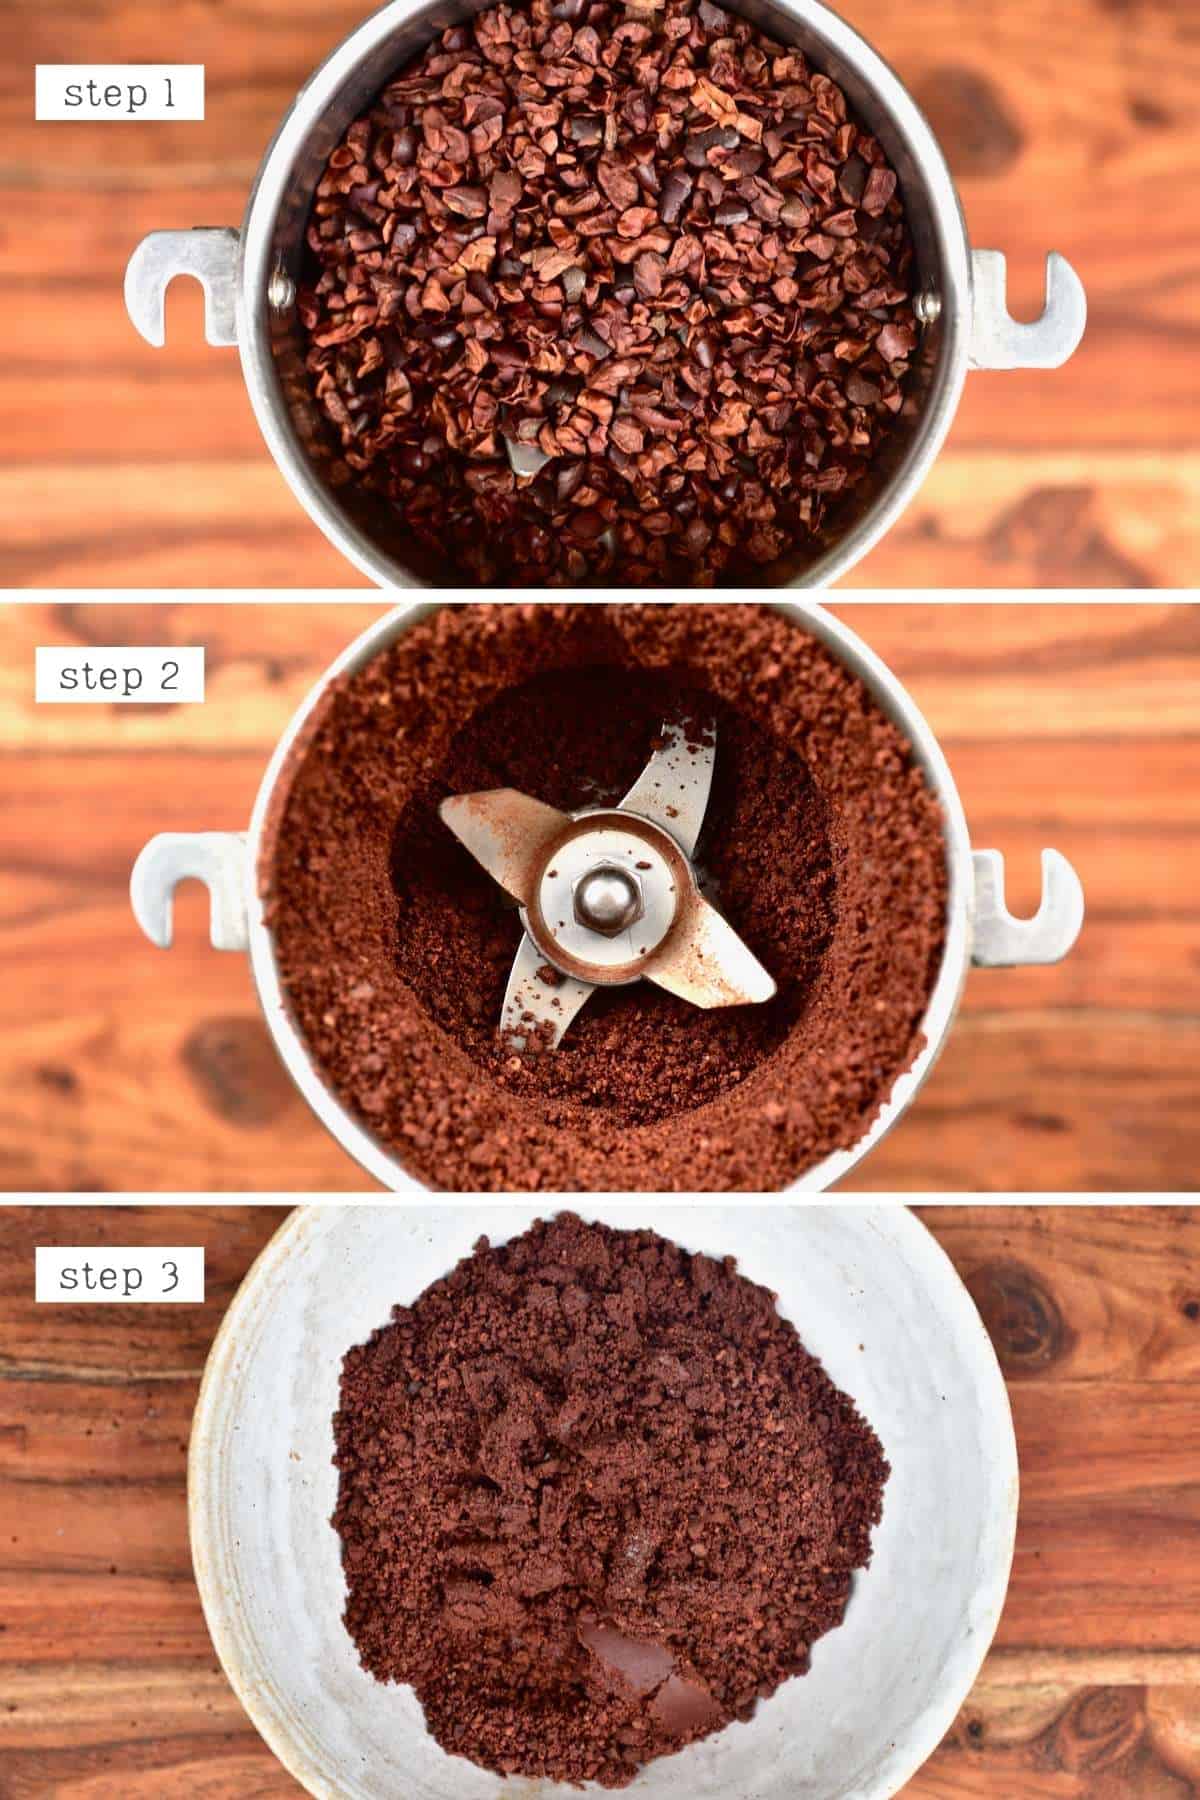 Grinding cacao nibs